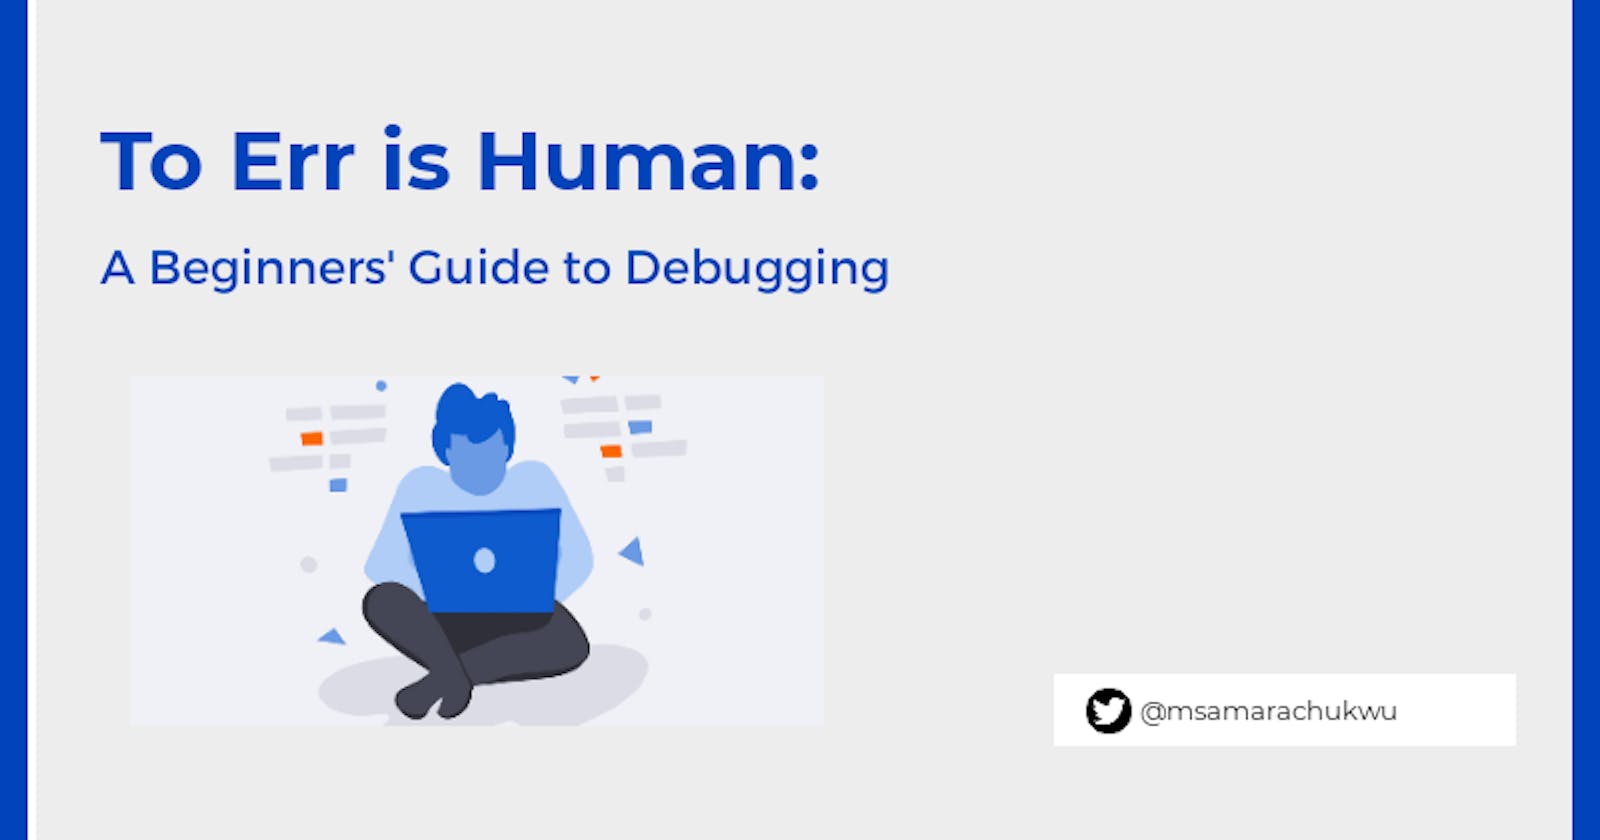 To Err is Human: A Beginners' Guide to Debugging